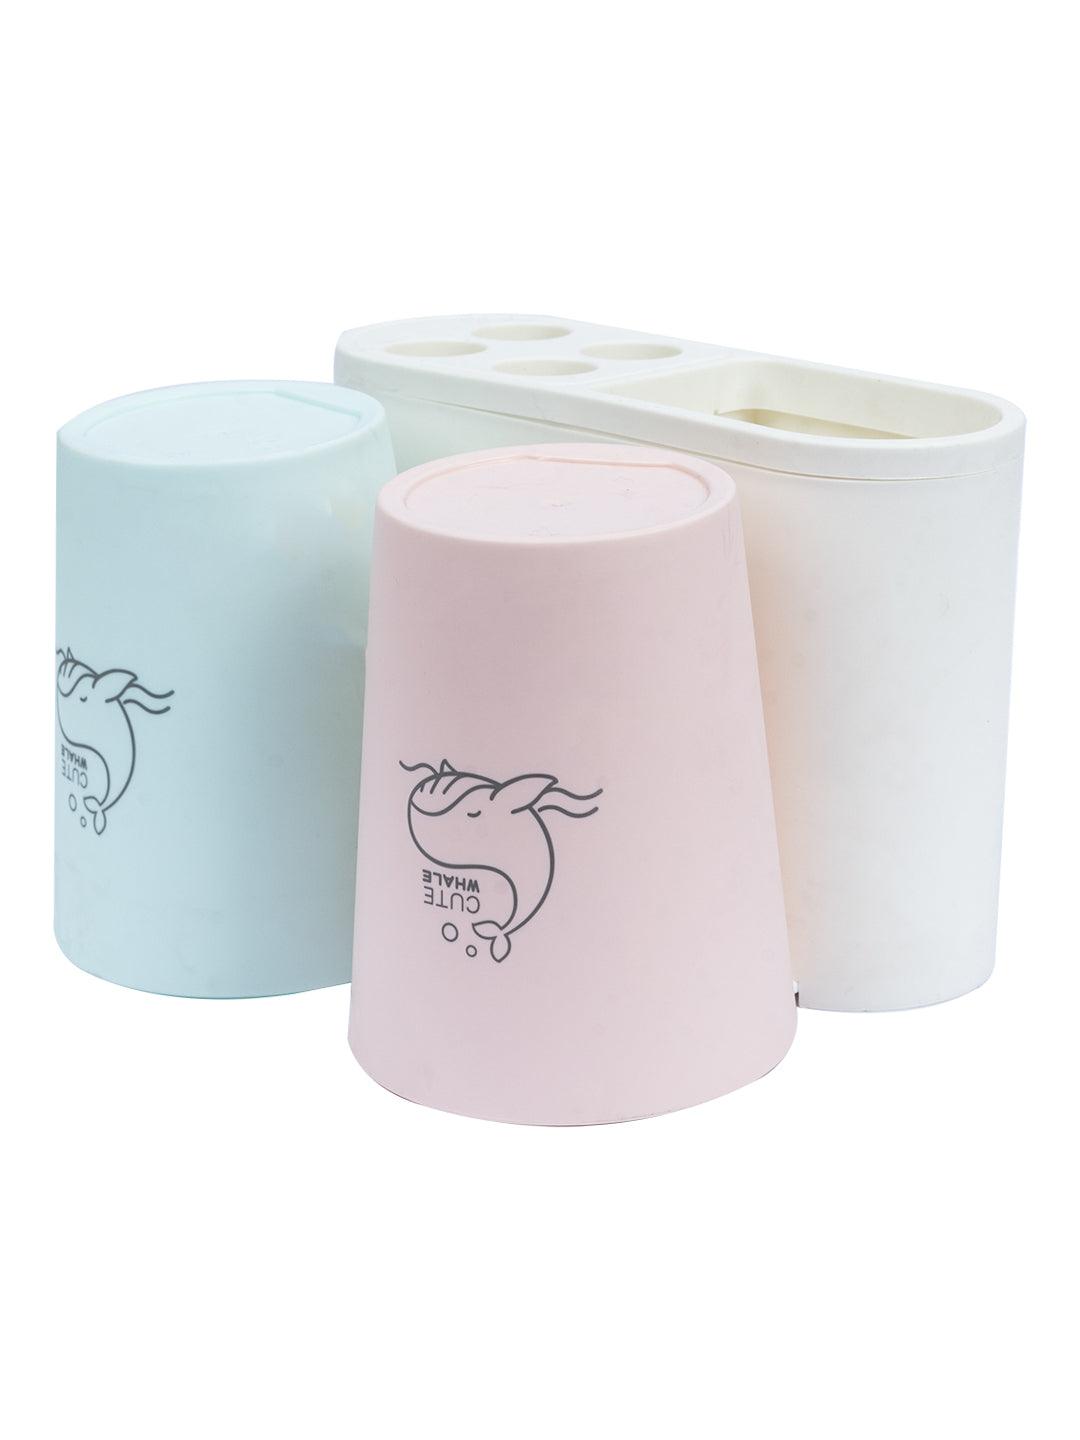 Market 99 Toothbrush Holder Pack Of 3 Pcs (Assorted), Whale Print, Assorted, Plastic - MARKET 99